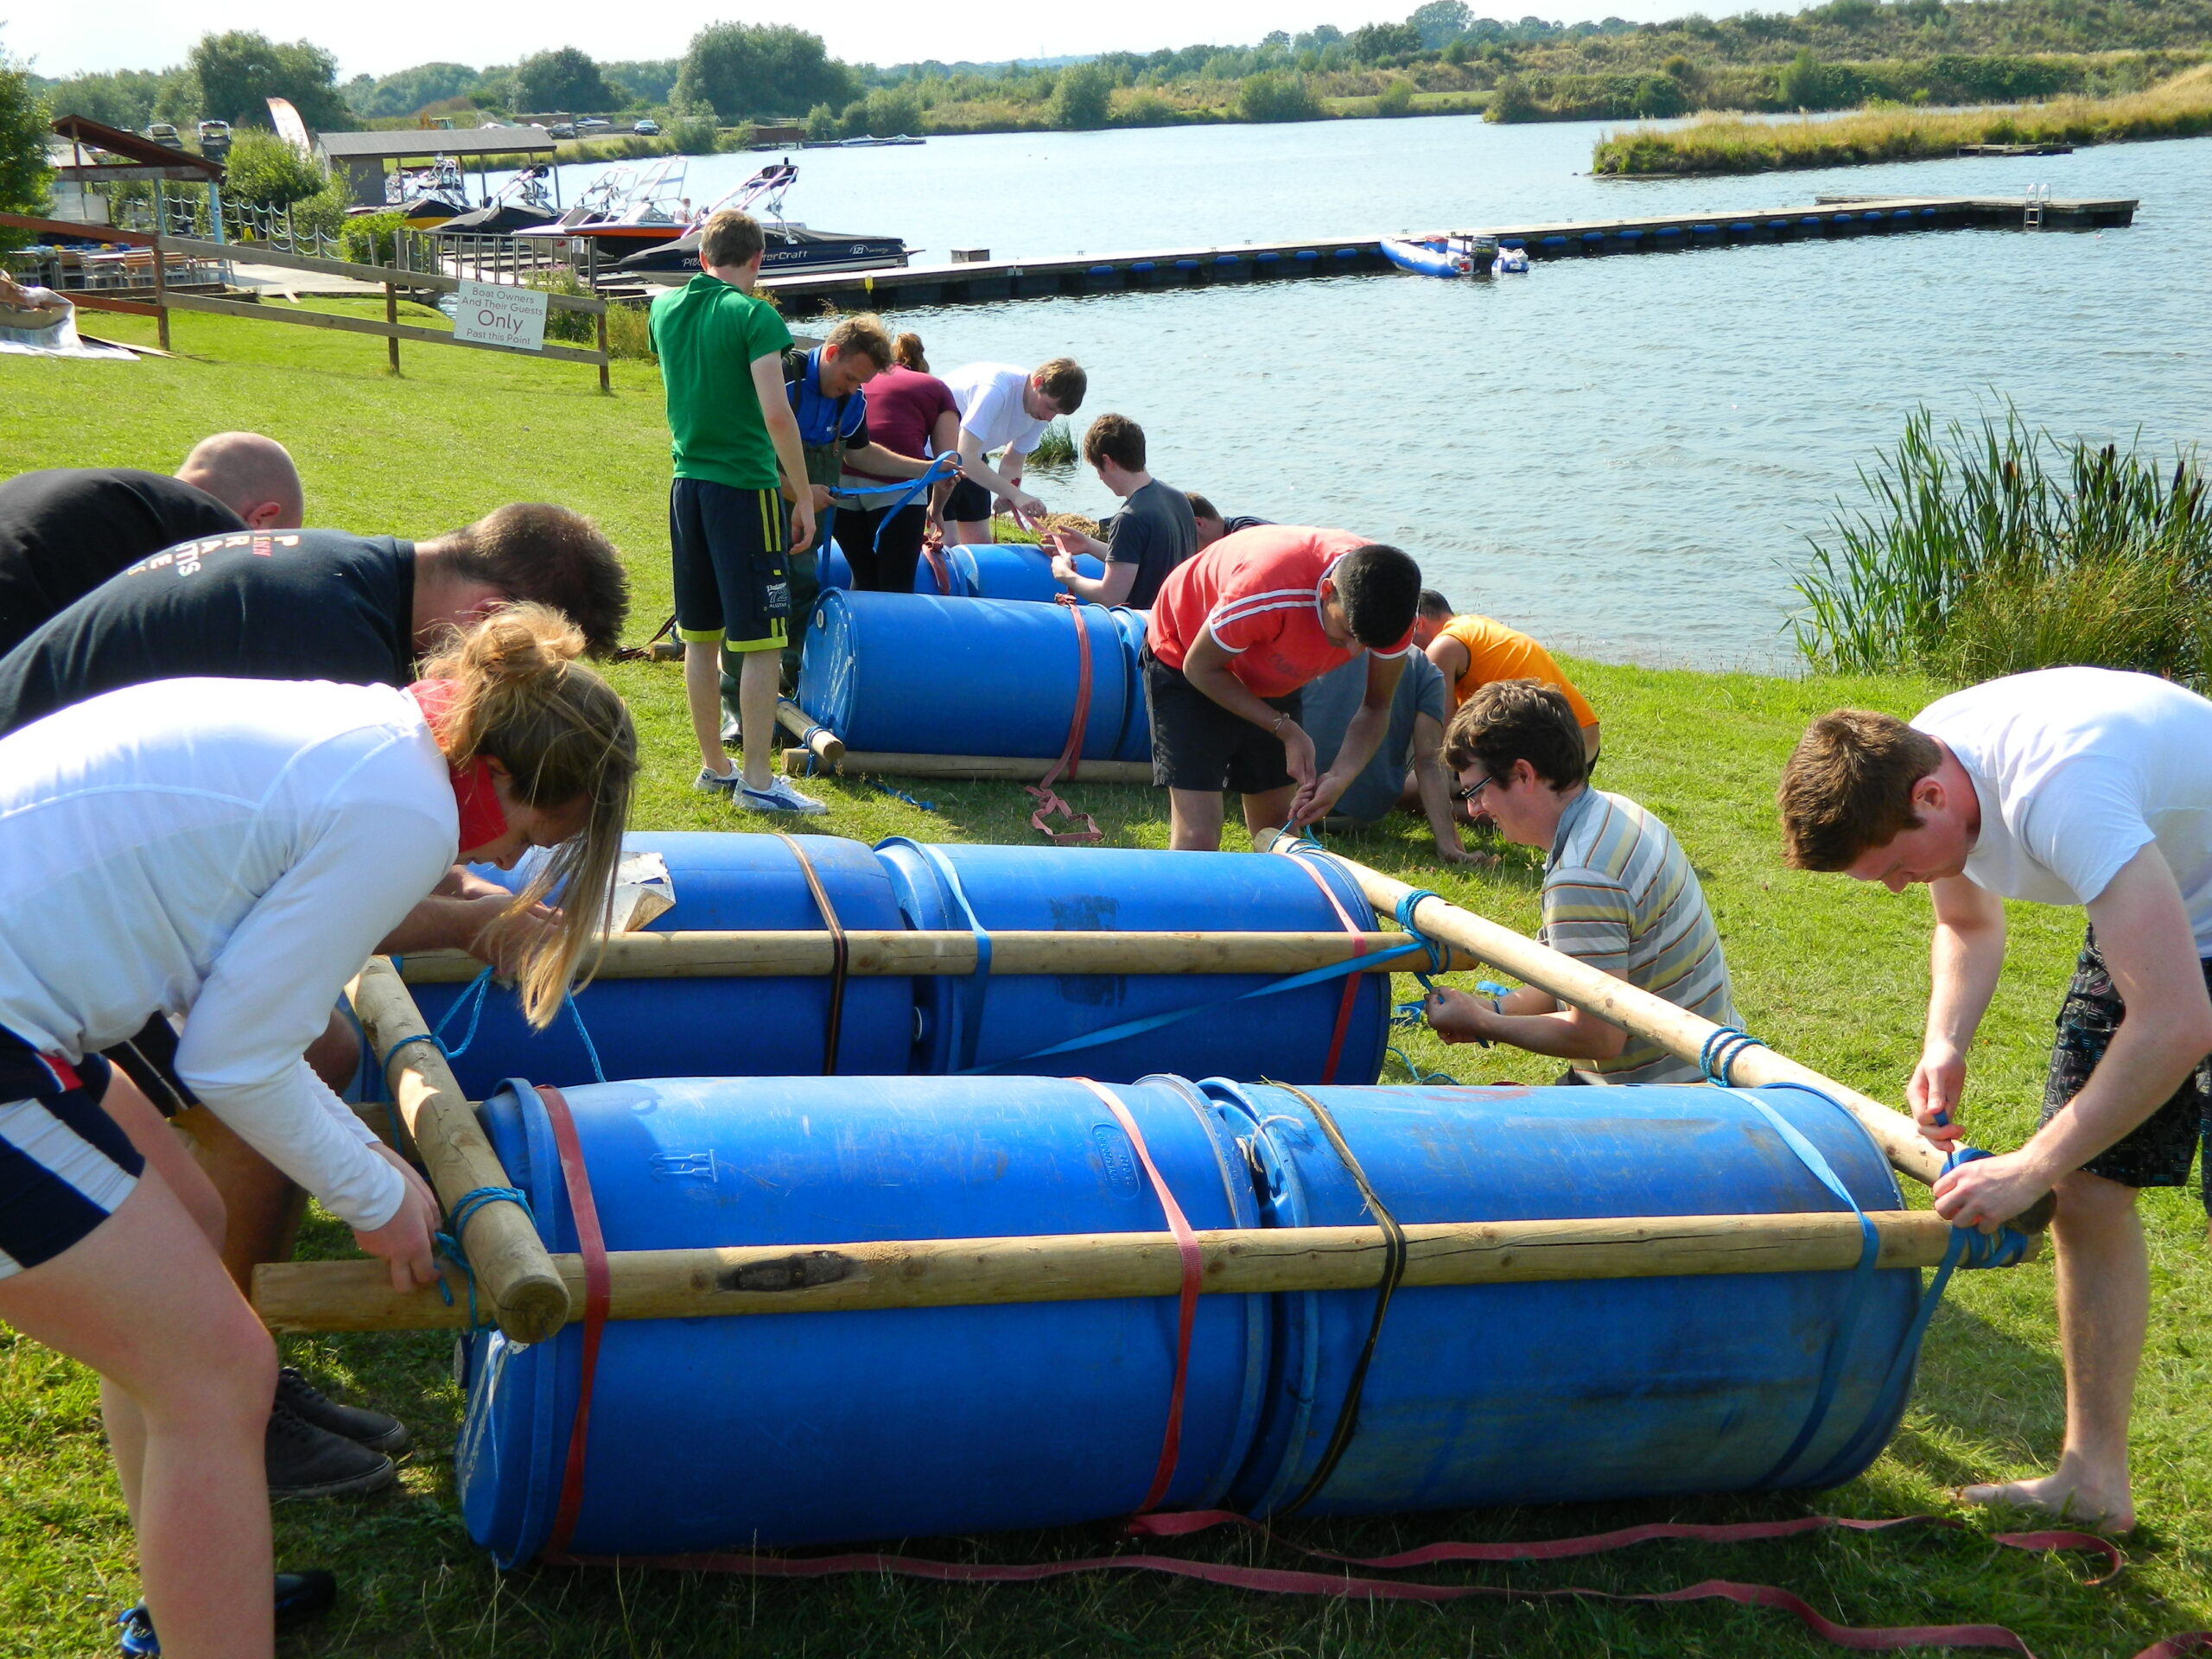 Raft building for team cohesion